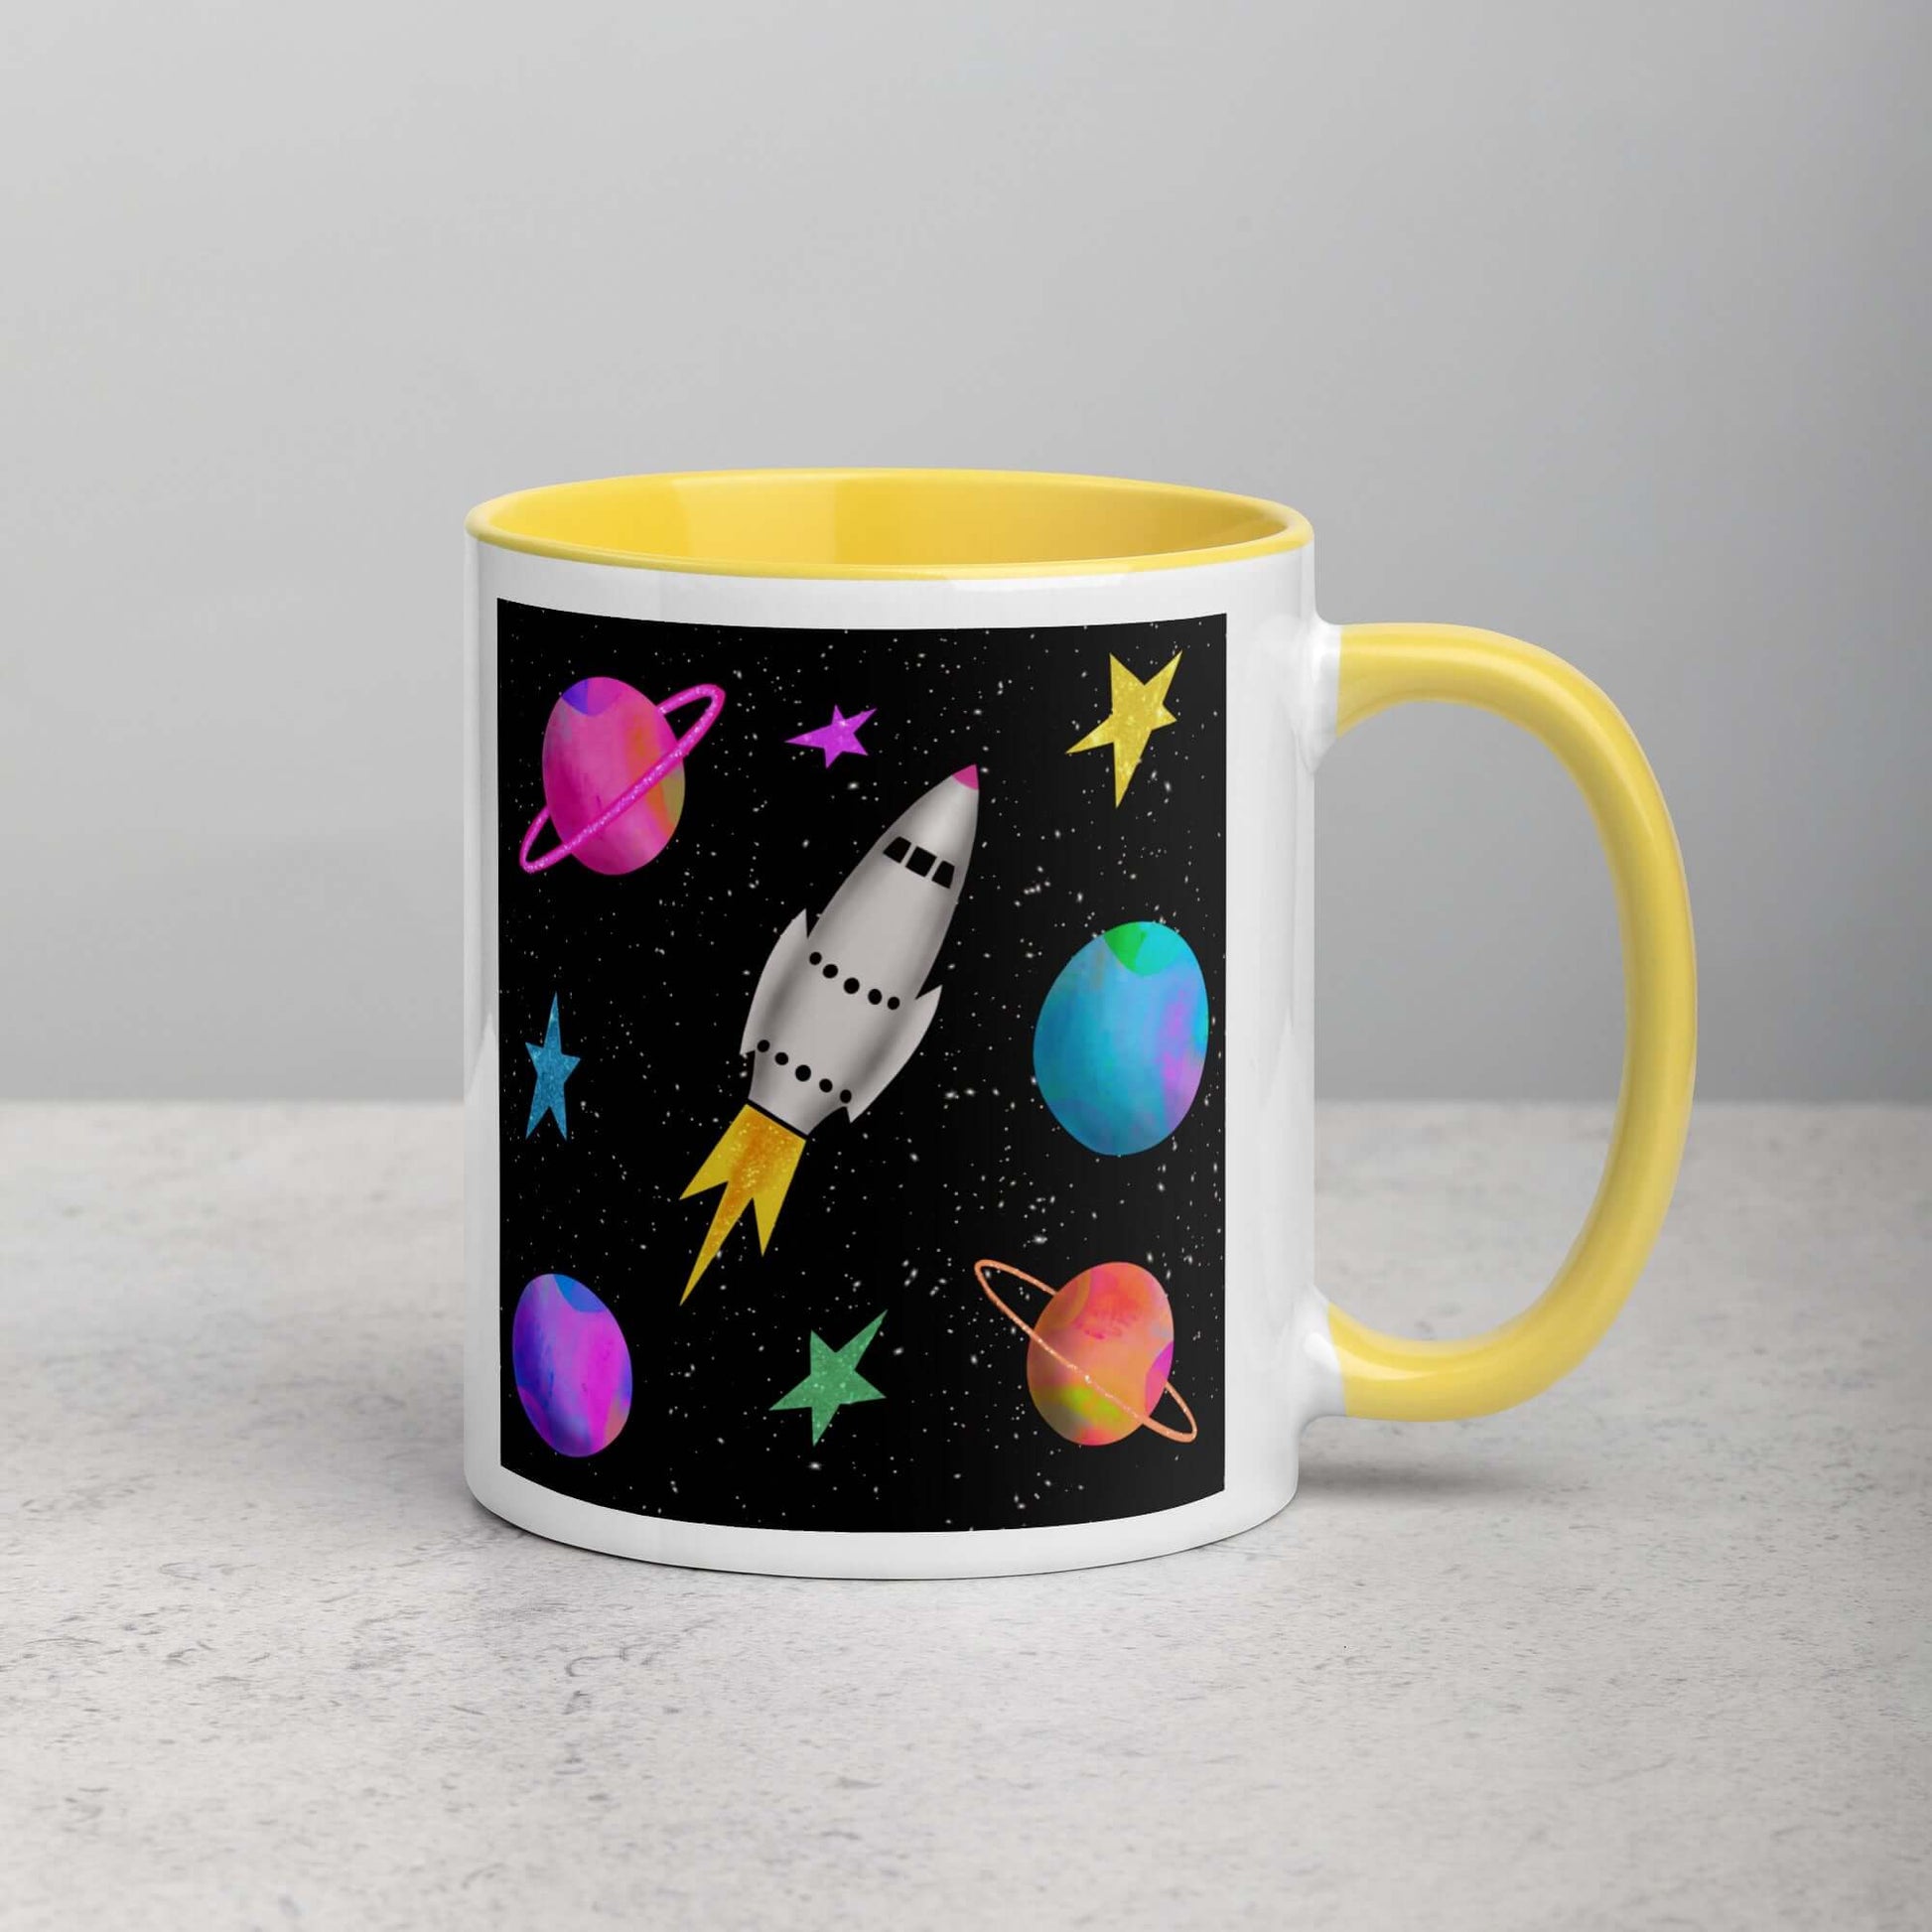 Whimsical Space Rocket with Colorful Planets and Stars on Black Background “Space Rockets” Mug with Bright Yellow Color Inside Right Handed Front View